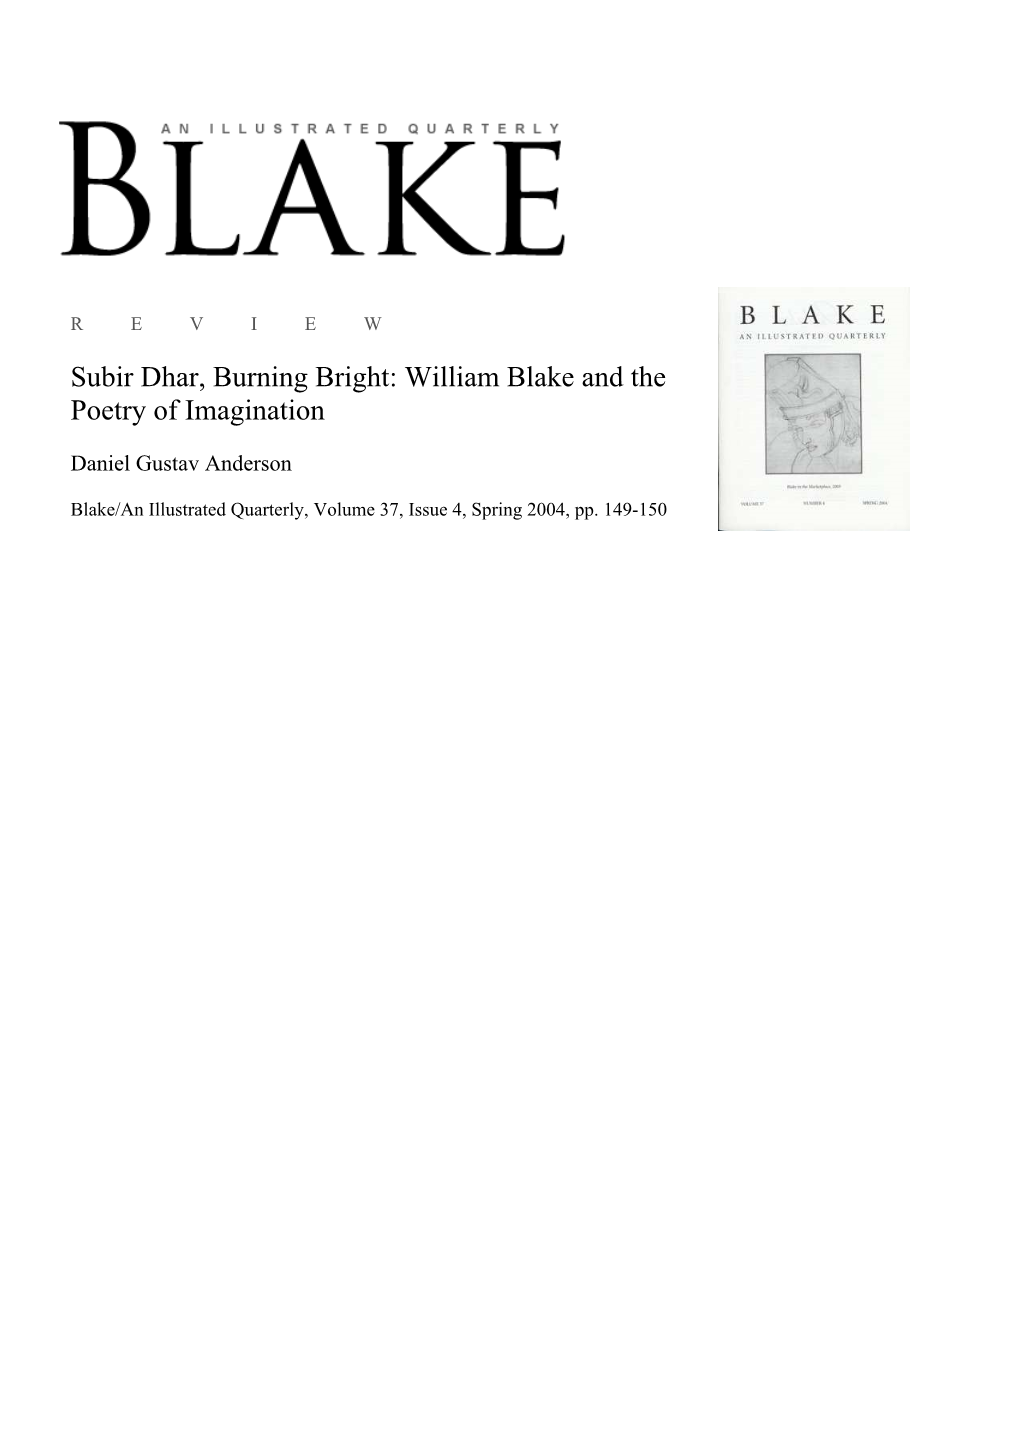 Subir Dhar, Burning Bright: William Blake and the Poetry of Imagination